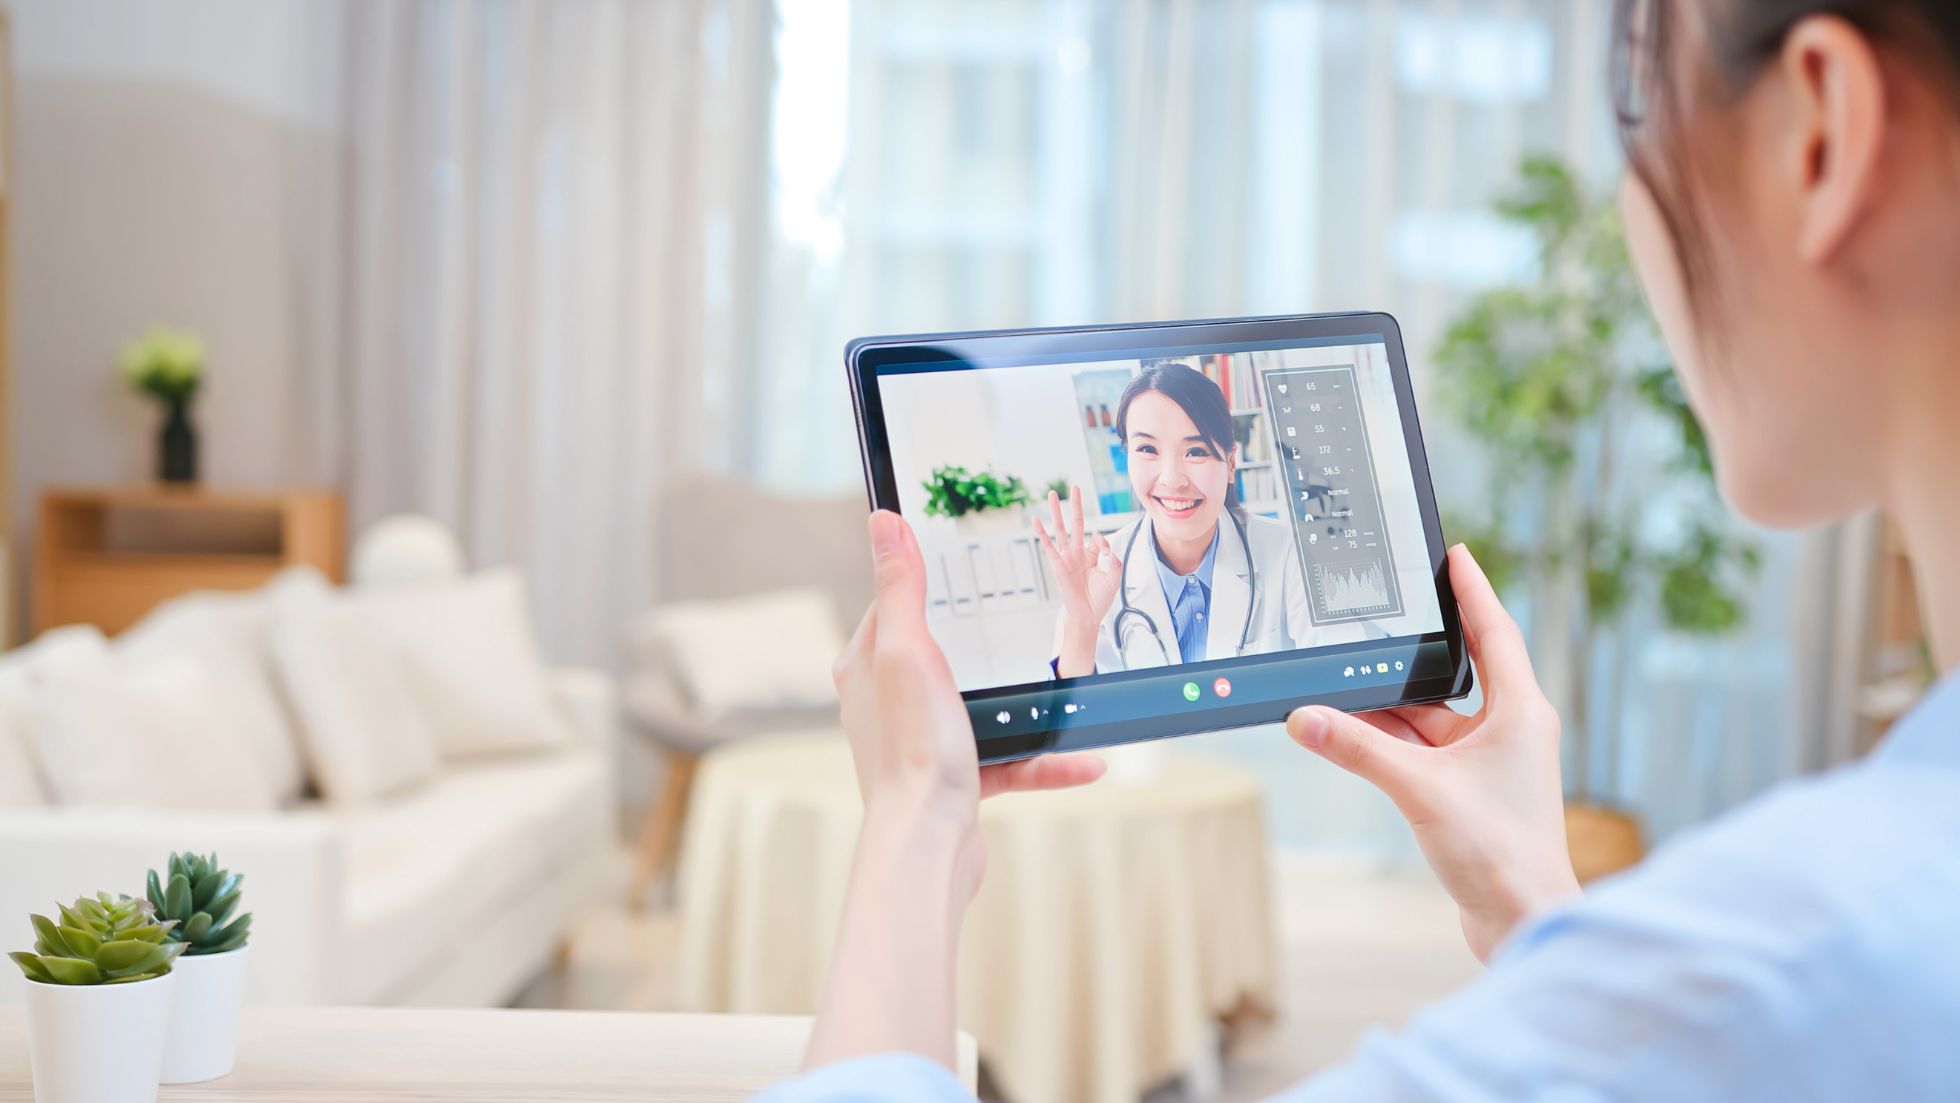 What are Important Differences Between Telehealth and In-Person Care